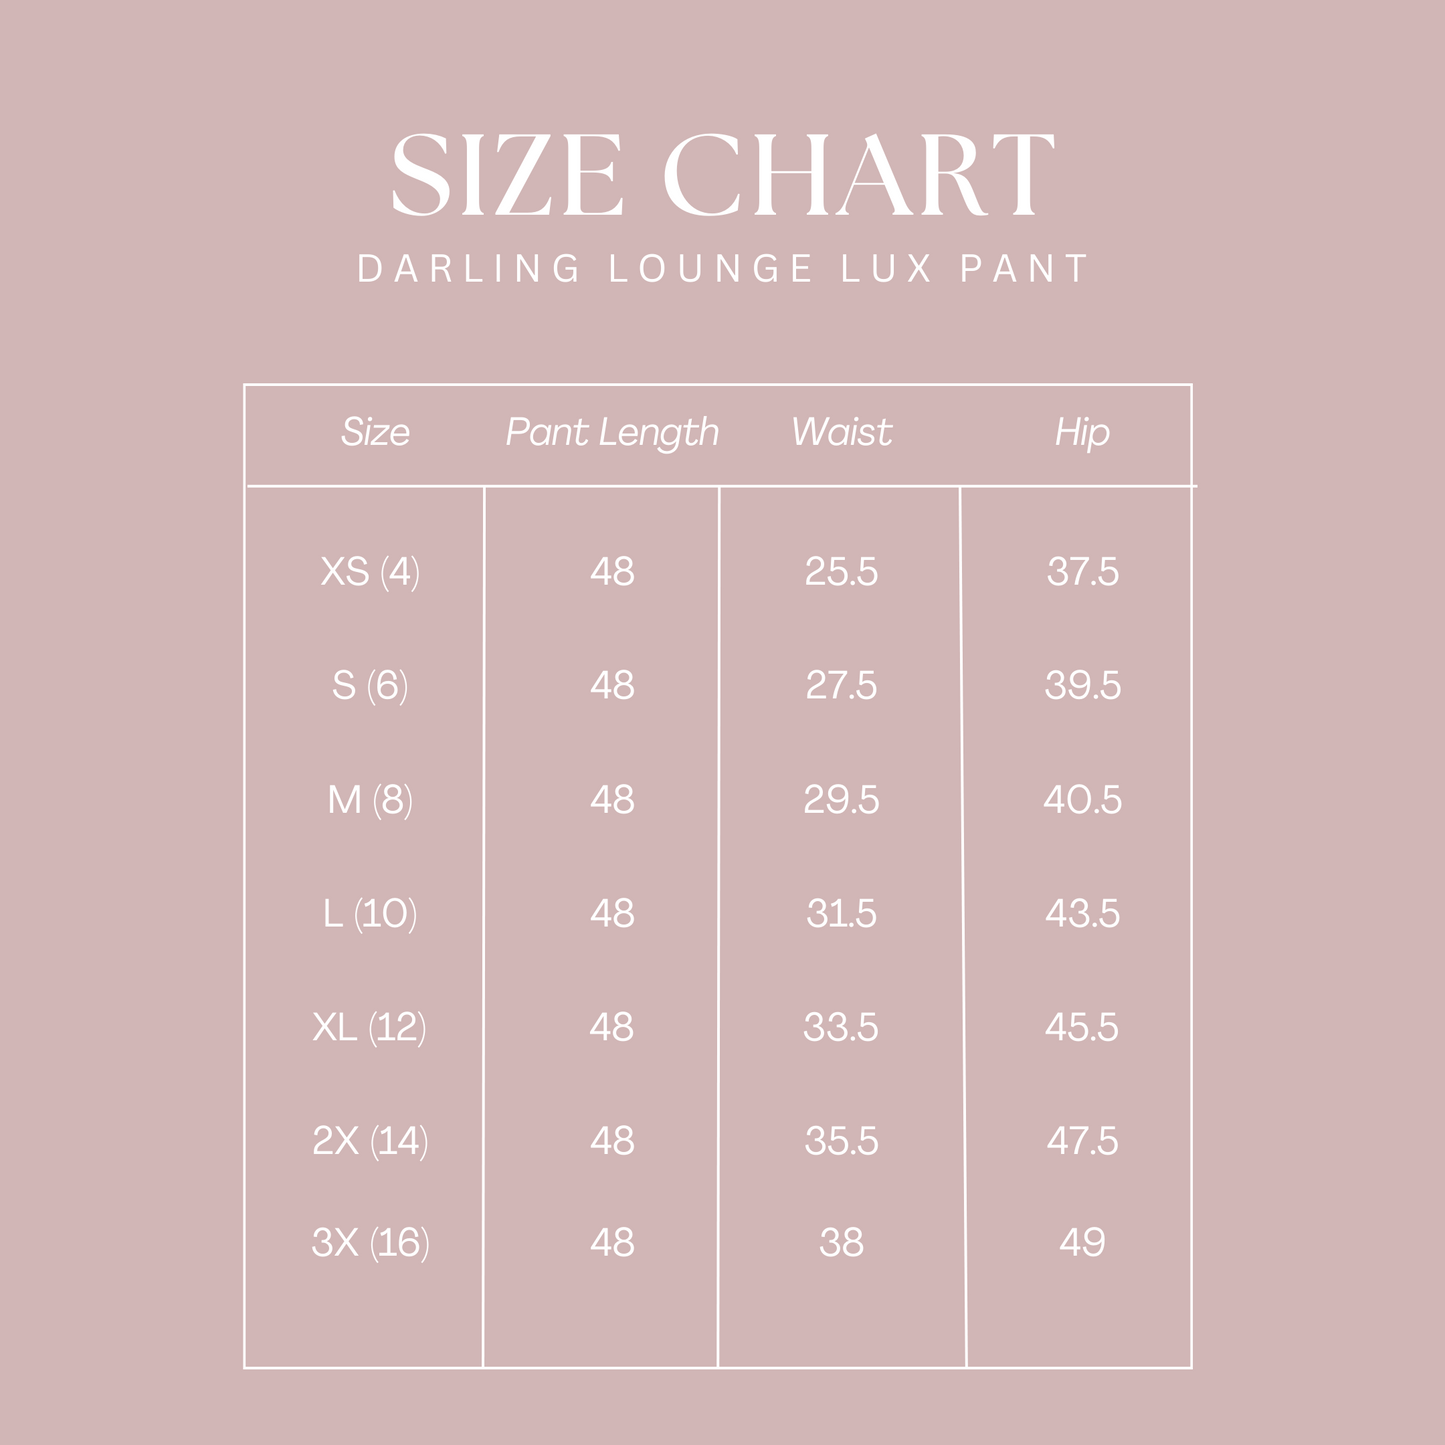 PRE-ORDER | Darling Lounge Lux Pant Only | Elegant High-Waisted Sheer Panel Pants